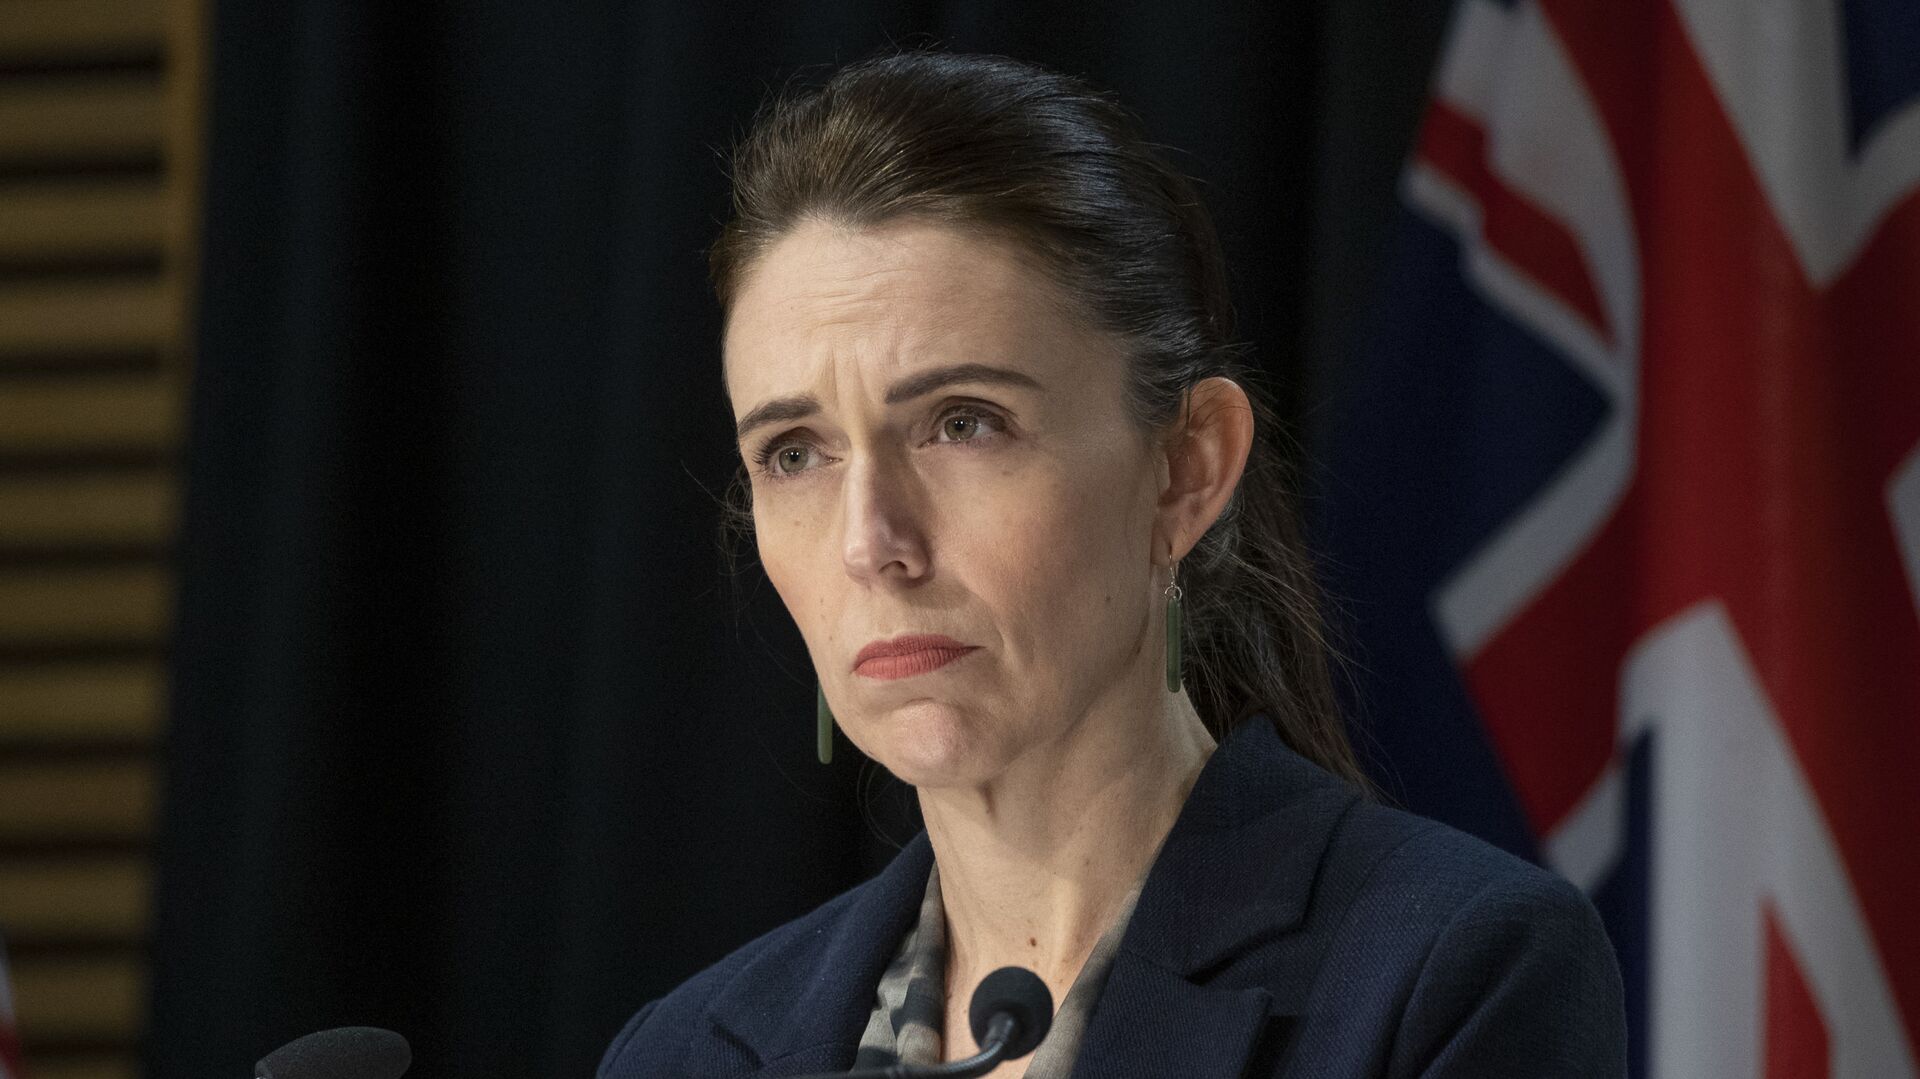 New Zealand's Prime Minister Jacinda Ardern speaks during a press conference in Wellington on September 4, 2021, following the country's first Covid-related death in six months and the day after an IS-inspired attacker injured six people in a knife rampage before being shot dead by undercover police.  - Sputnik International, 1920, 09.09.2021